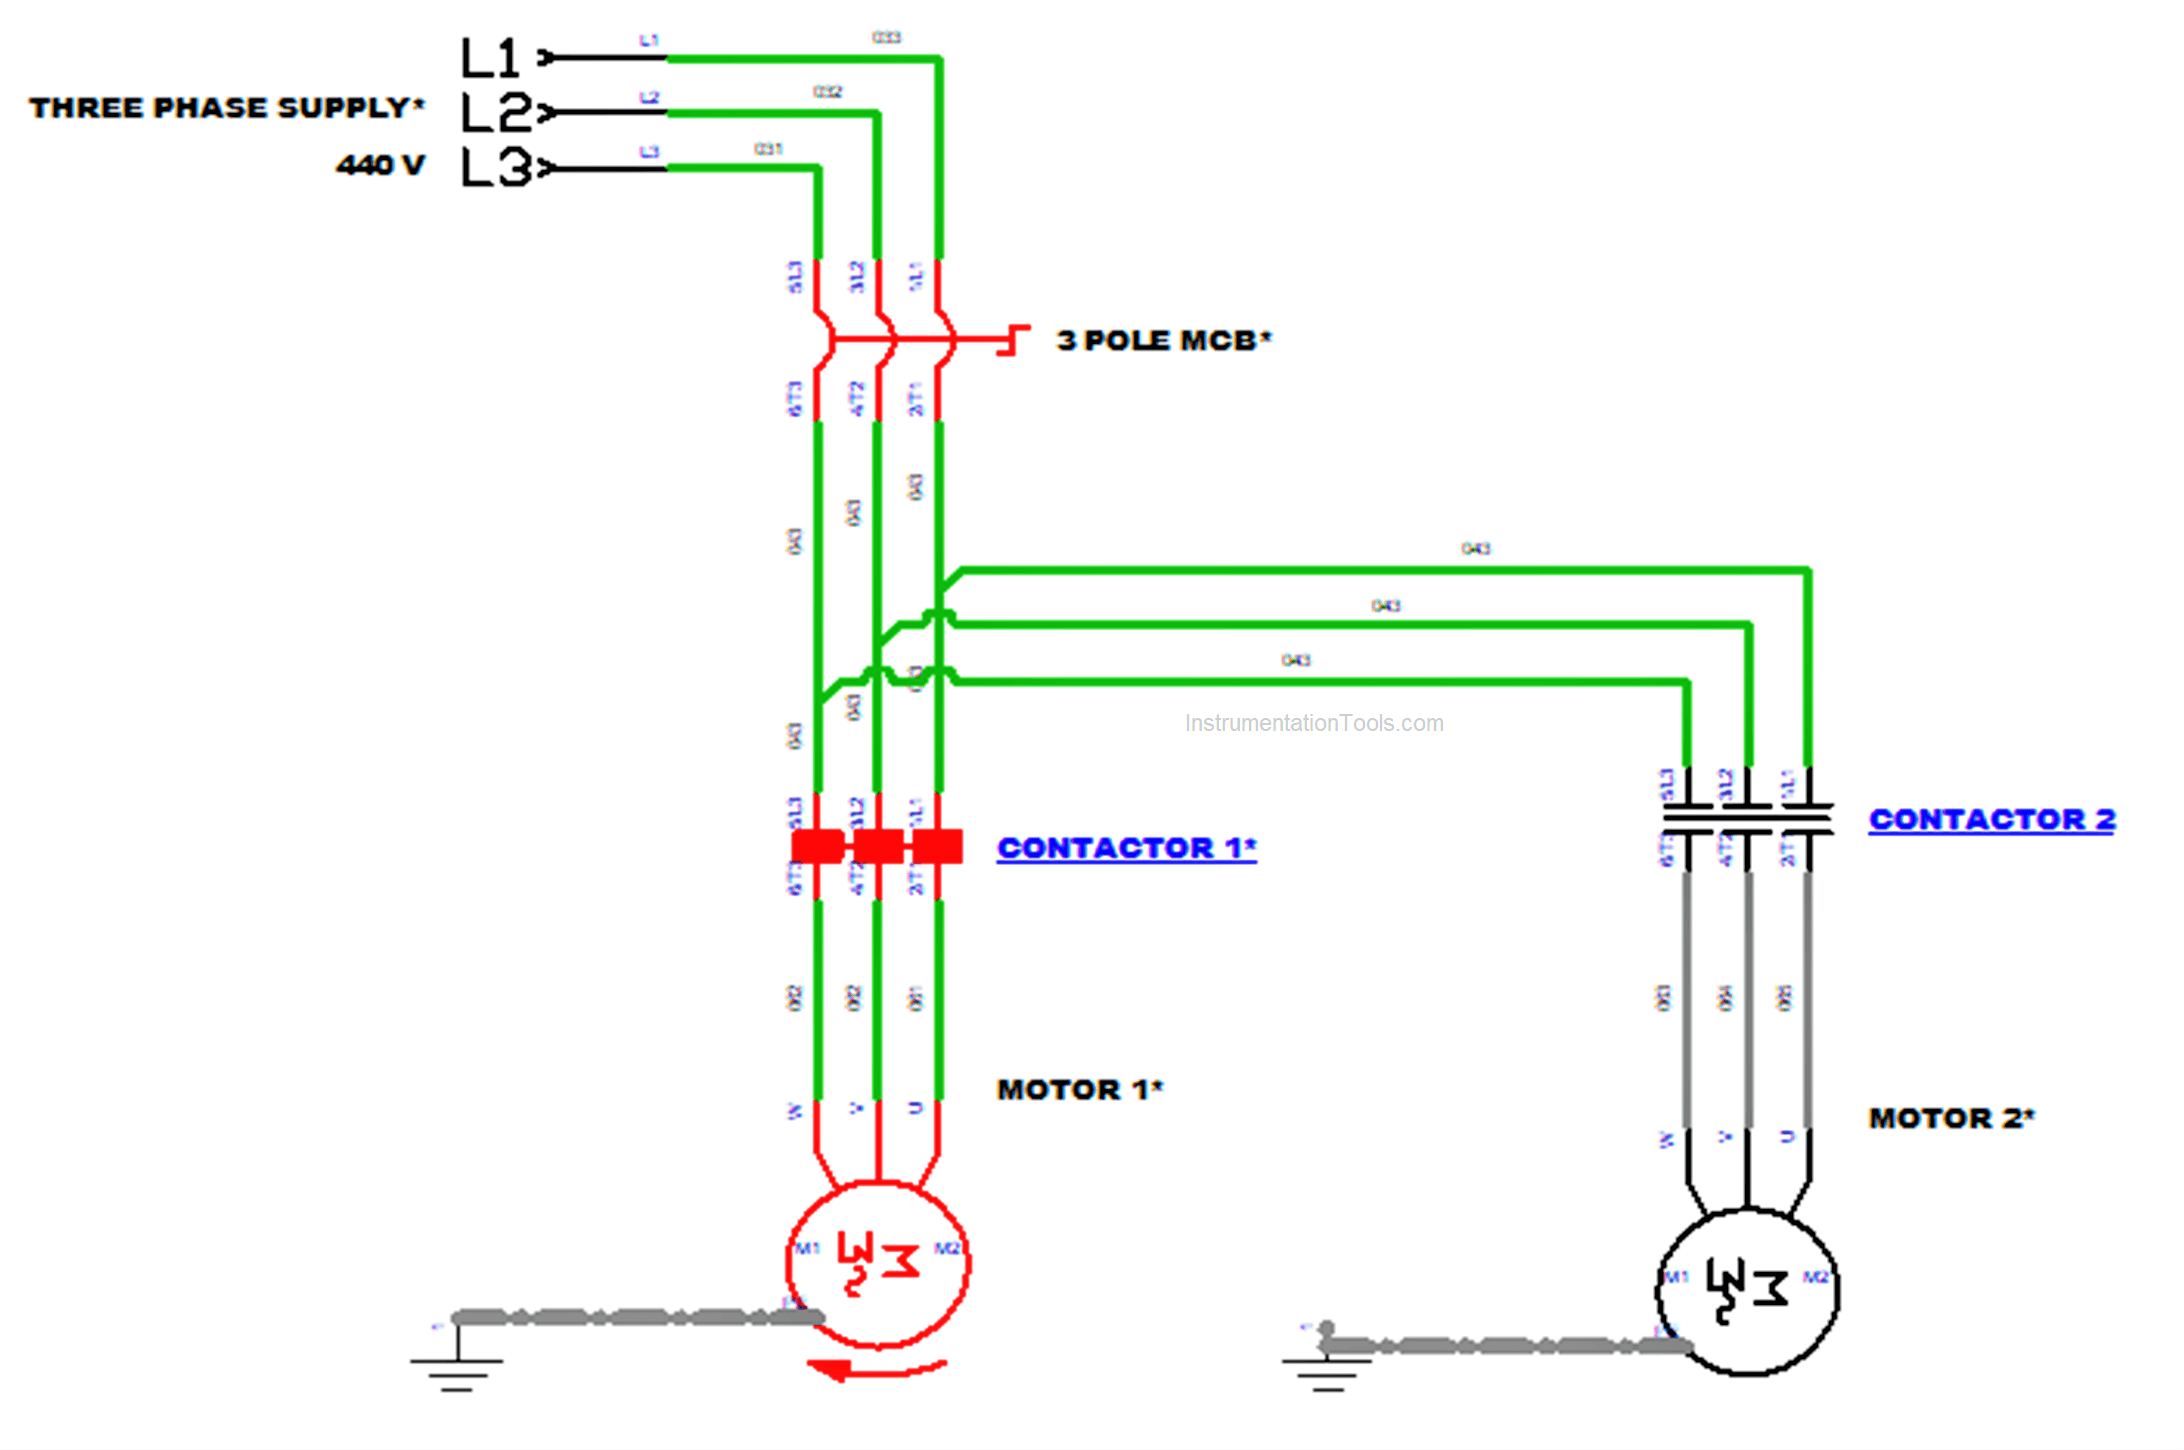 Sequence Starting of two motors